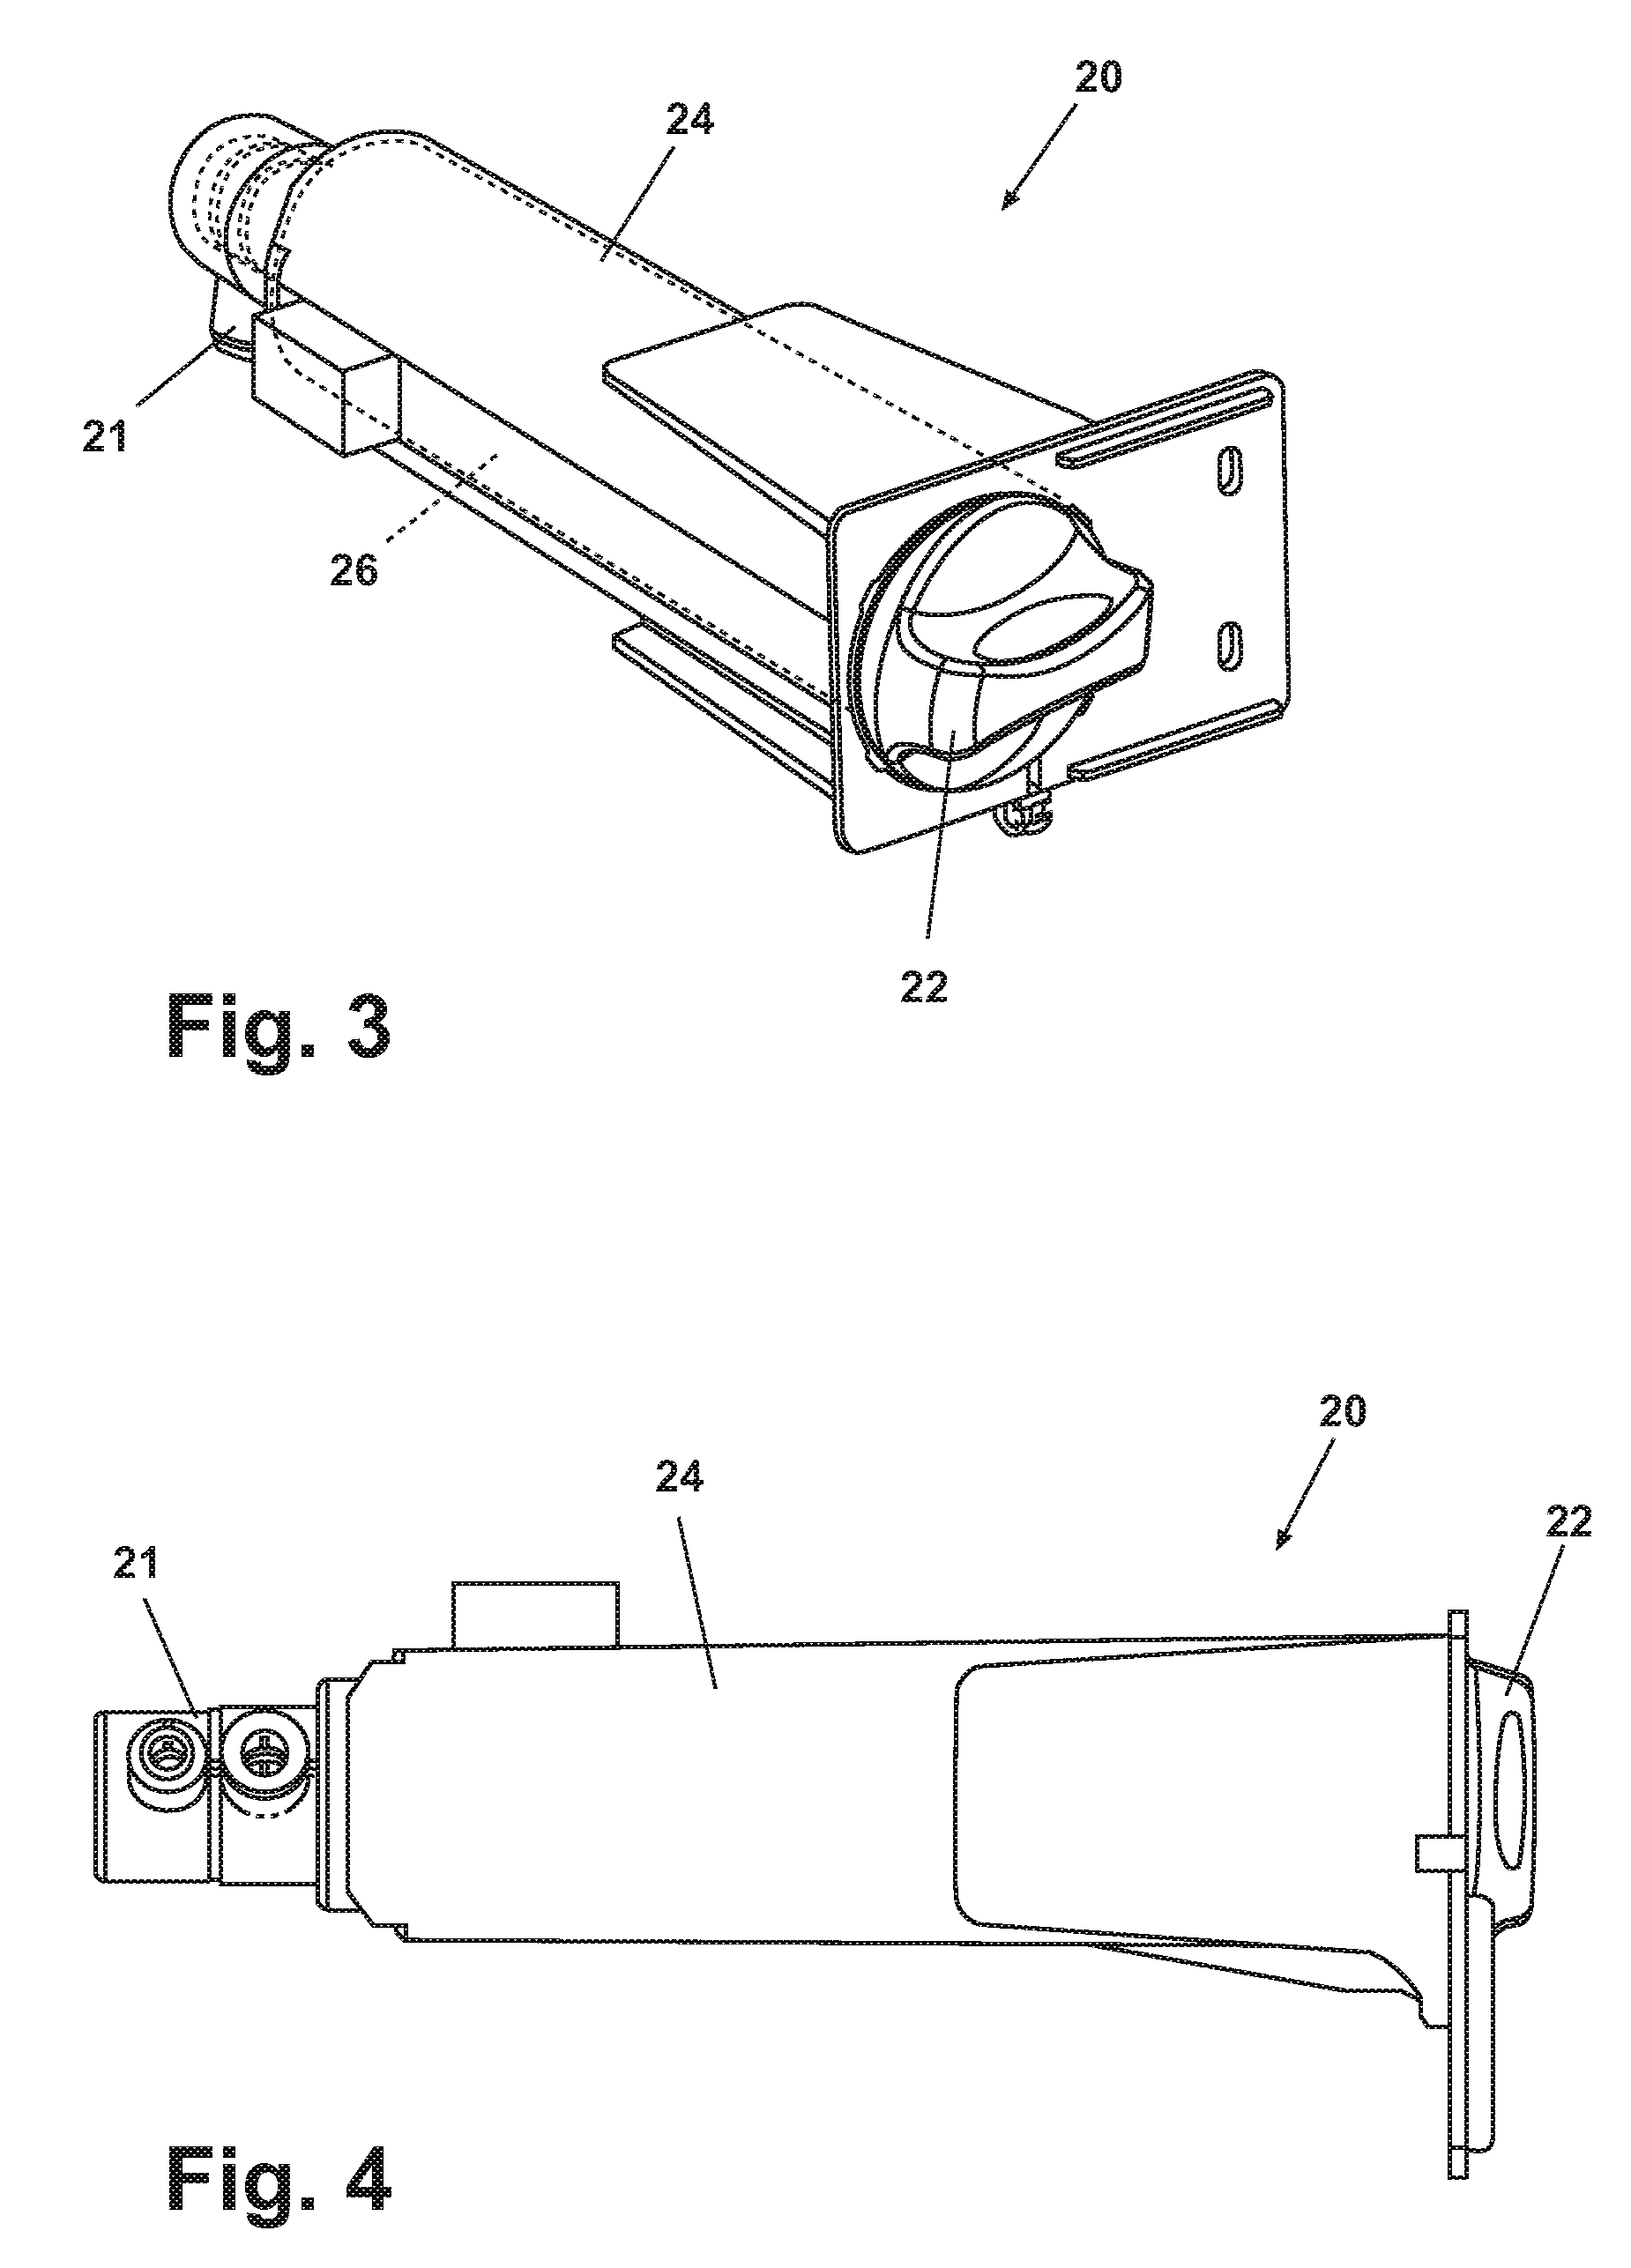 Water filter removal and installation tool